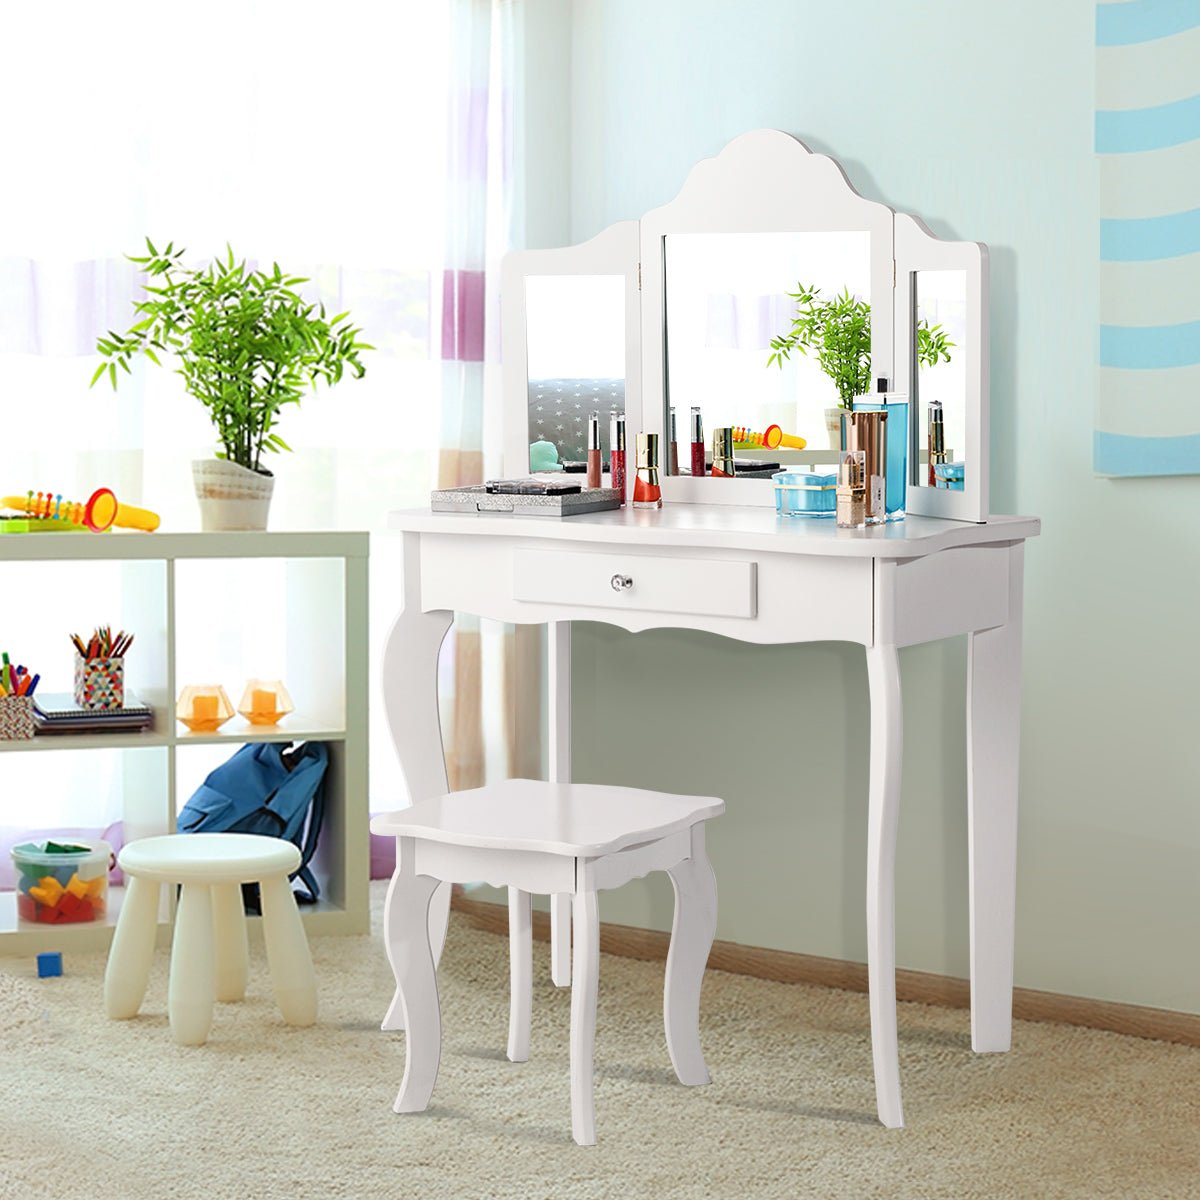 Buy the Ultimate White Kids Dressing Table Set for Imaginative Play